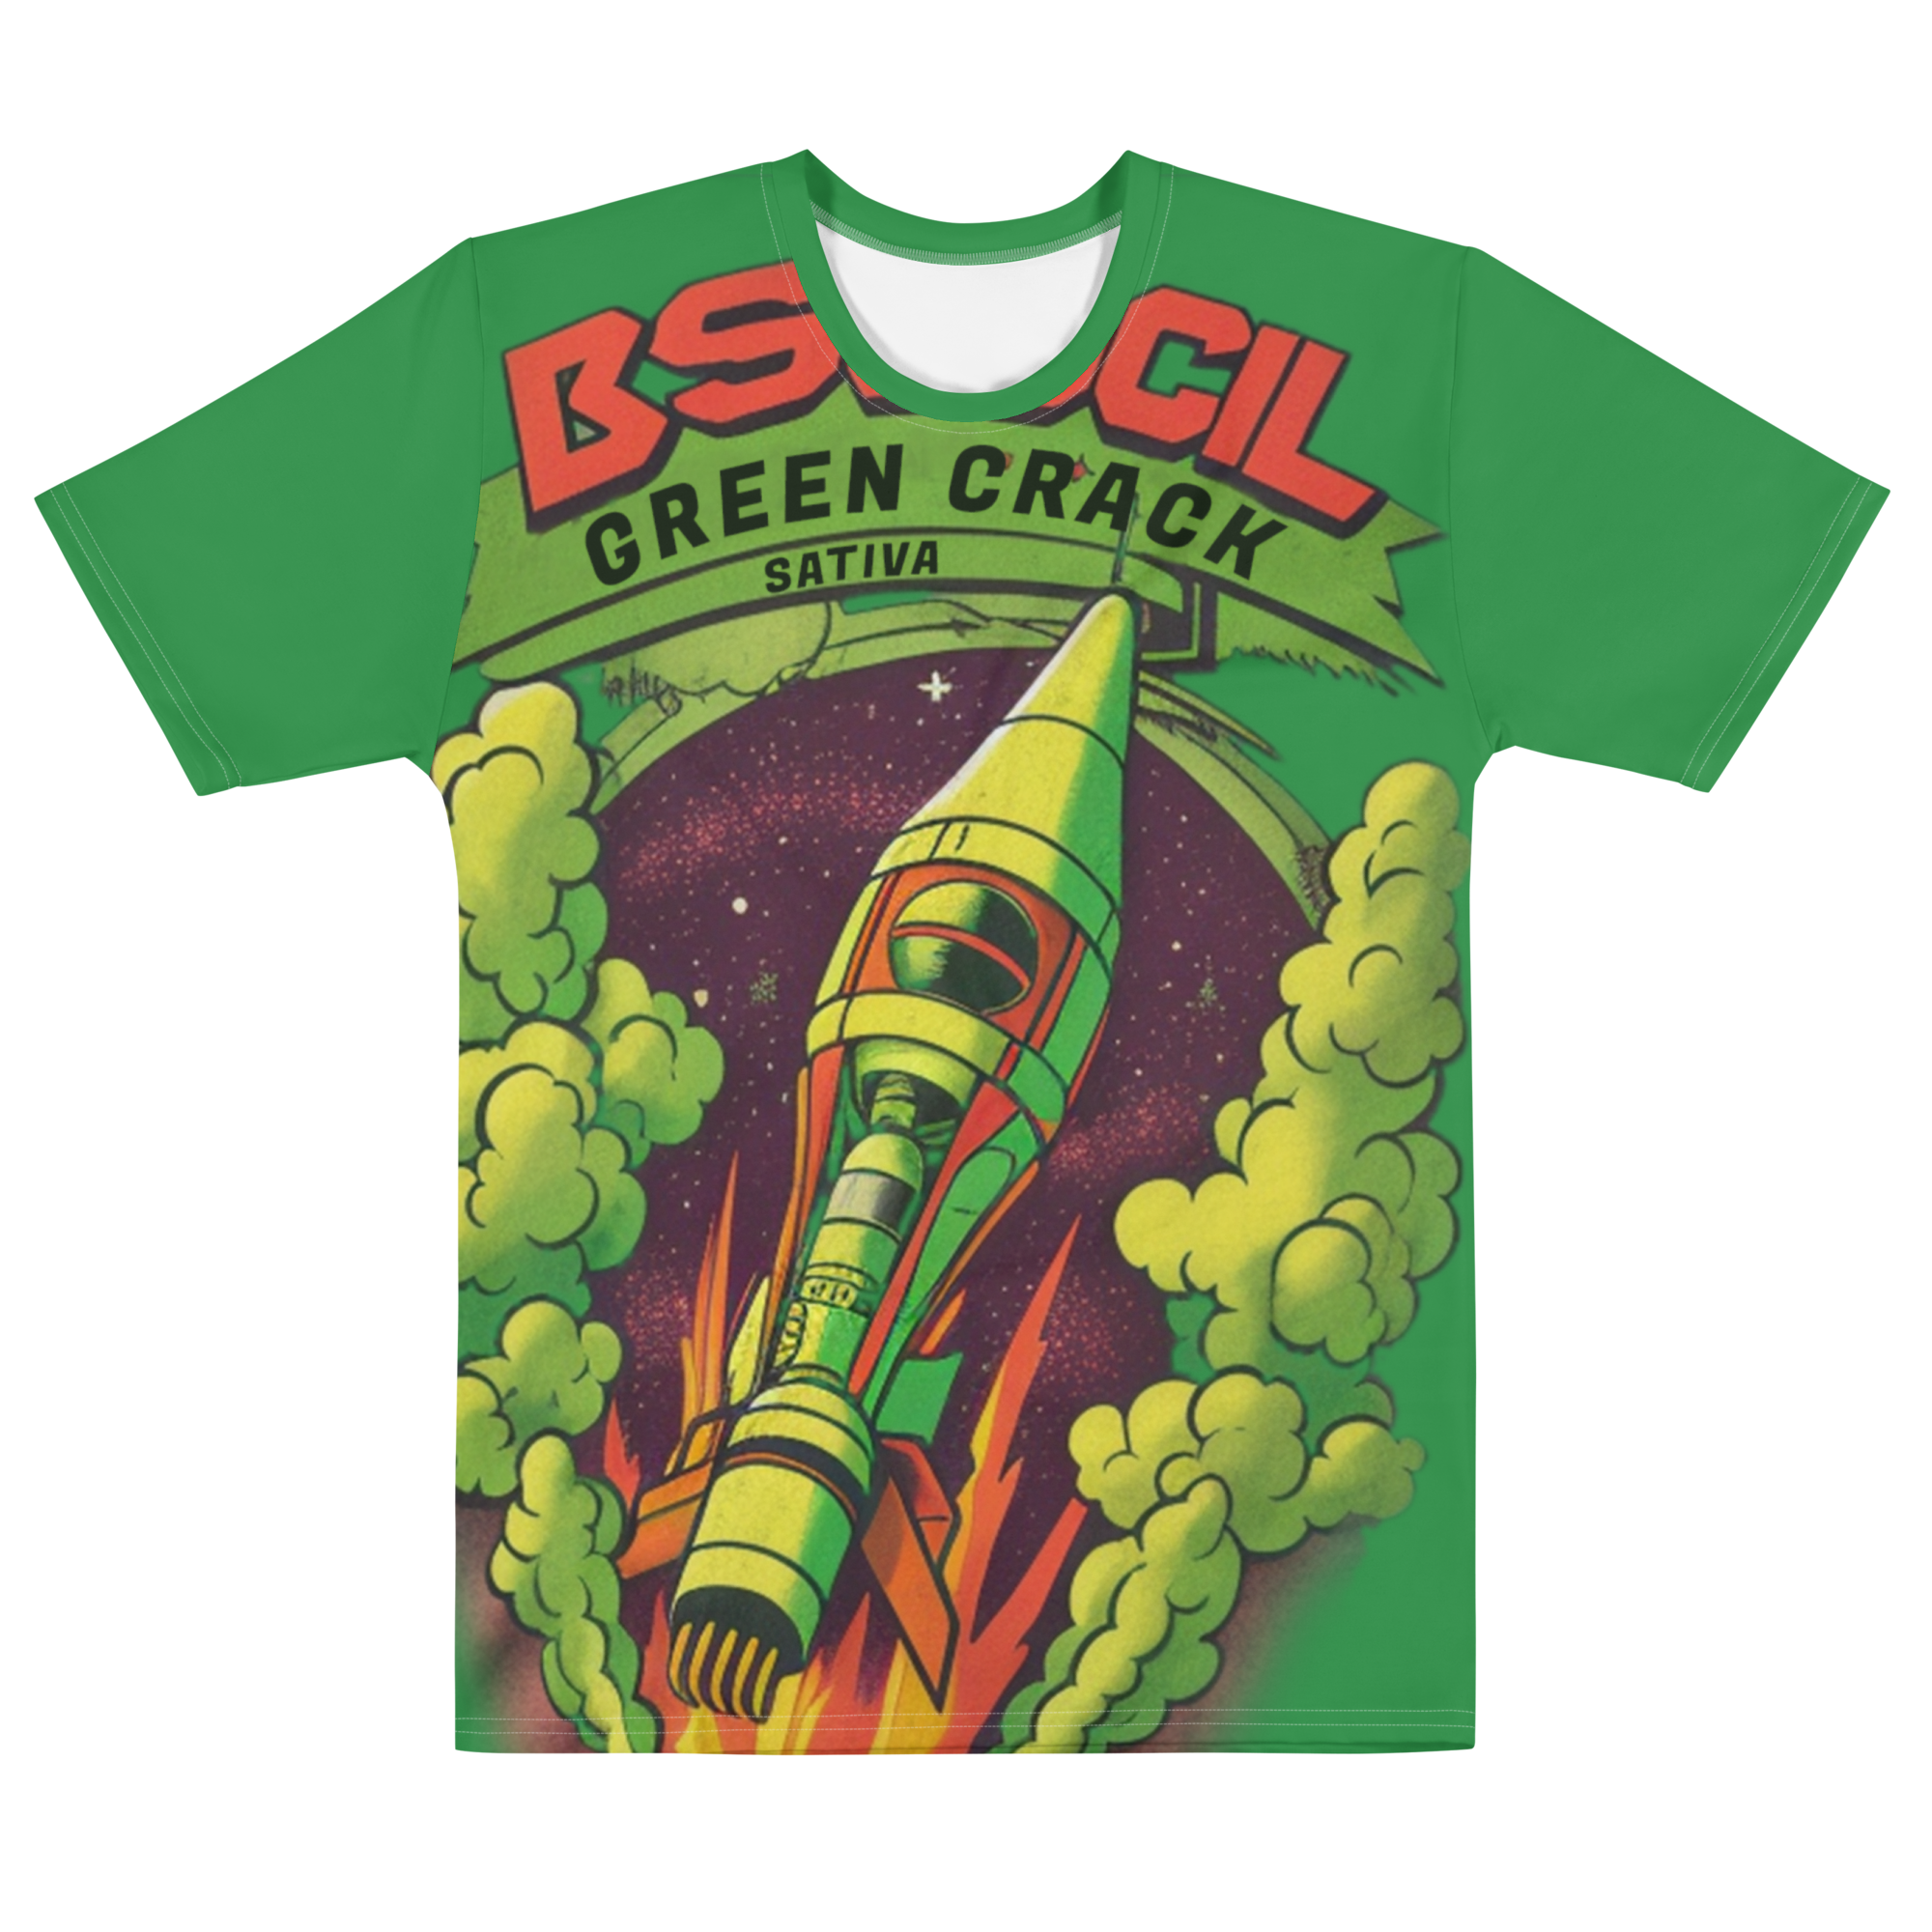 Flat mock-up of the Green Crack spaceship t-shirt, showcasing its vibrant green color and playful rocket ship design, symbolizing the uplifting effects of the Green Crack cannabis strain.